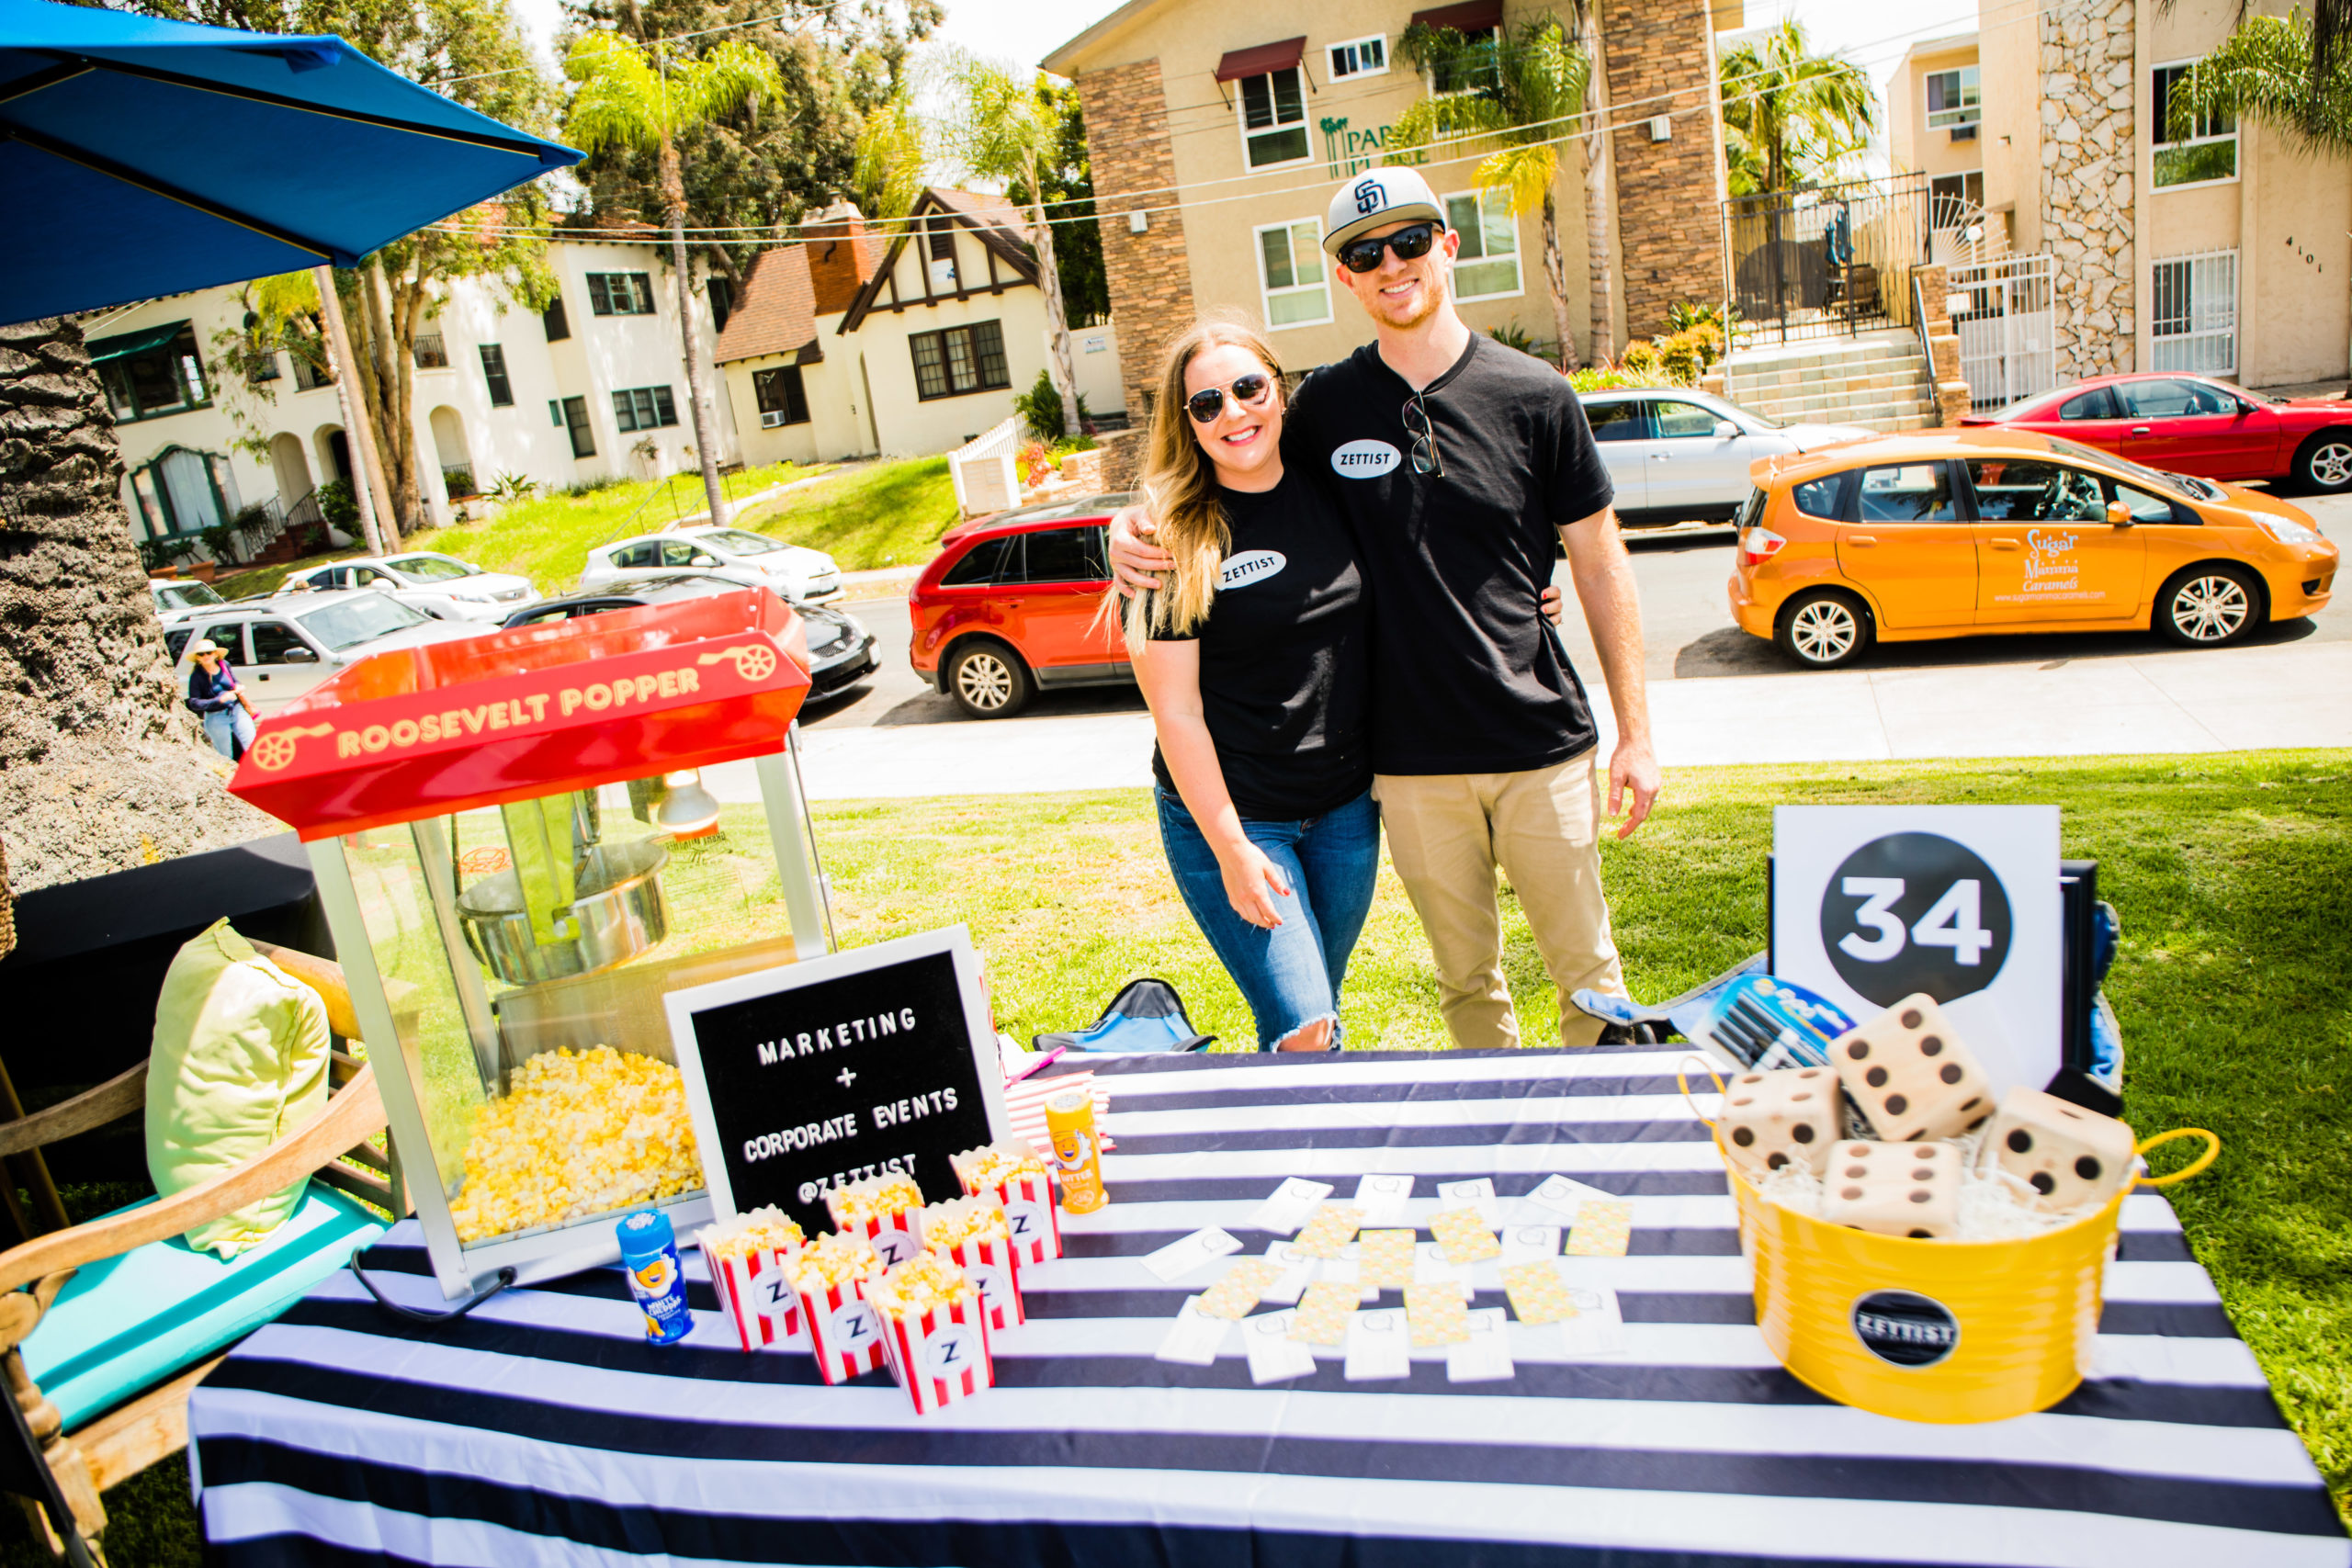 Jana Devan, Founder of Zettist, and husband at a community event in San Diego giving away popcorn at an information booth